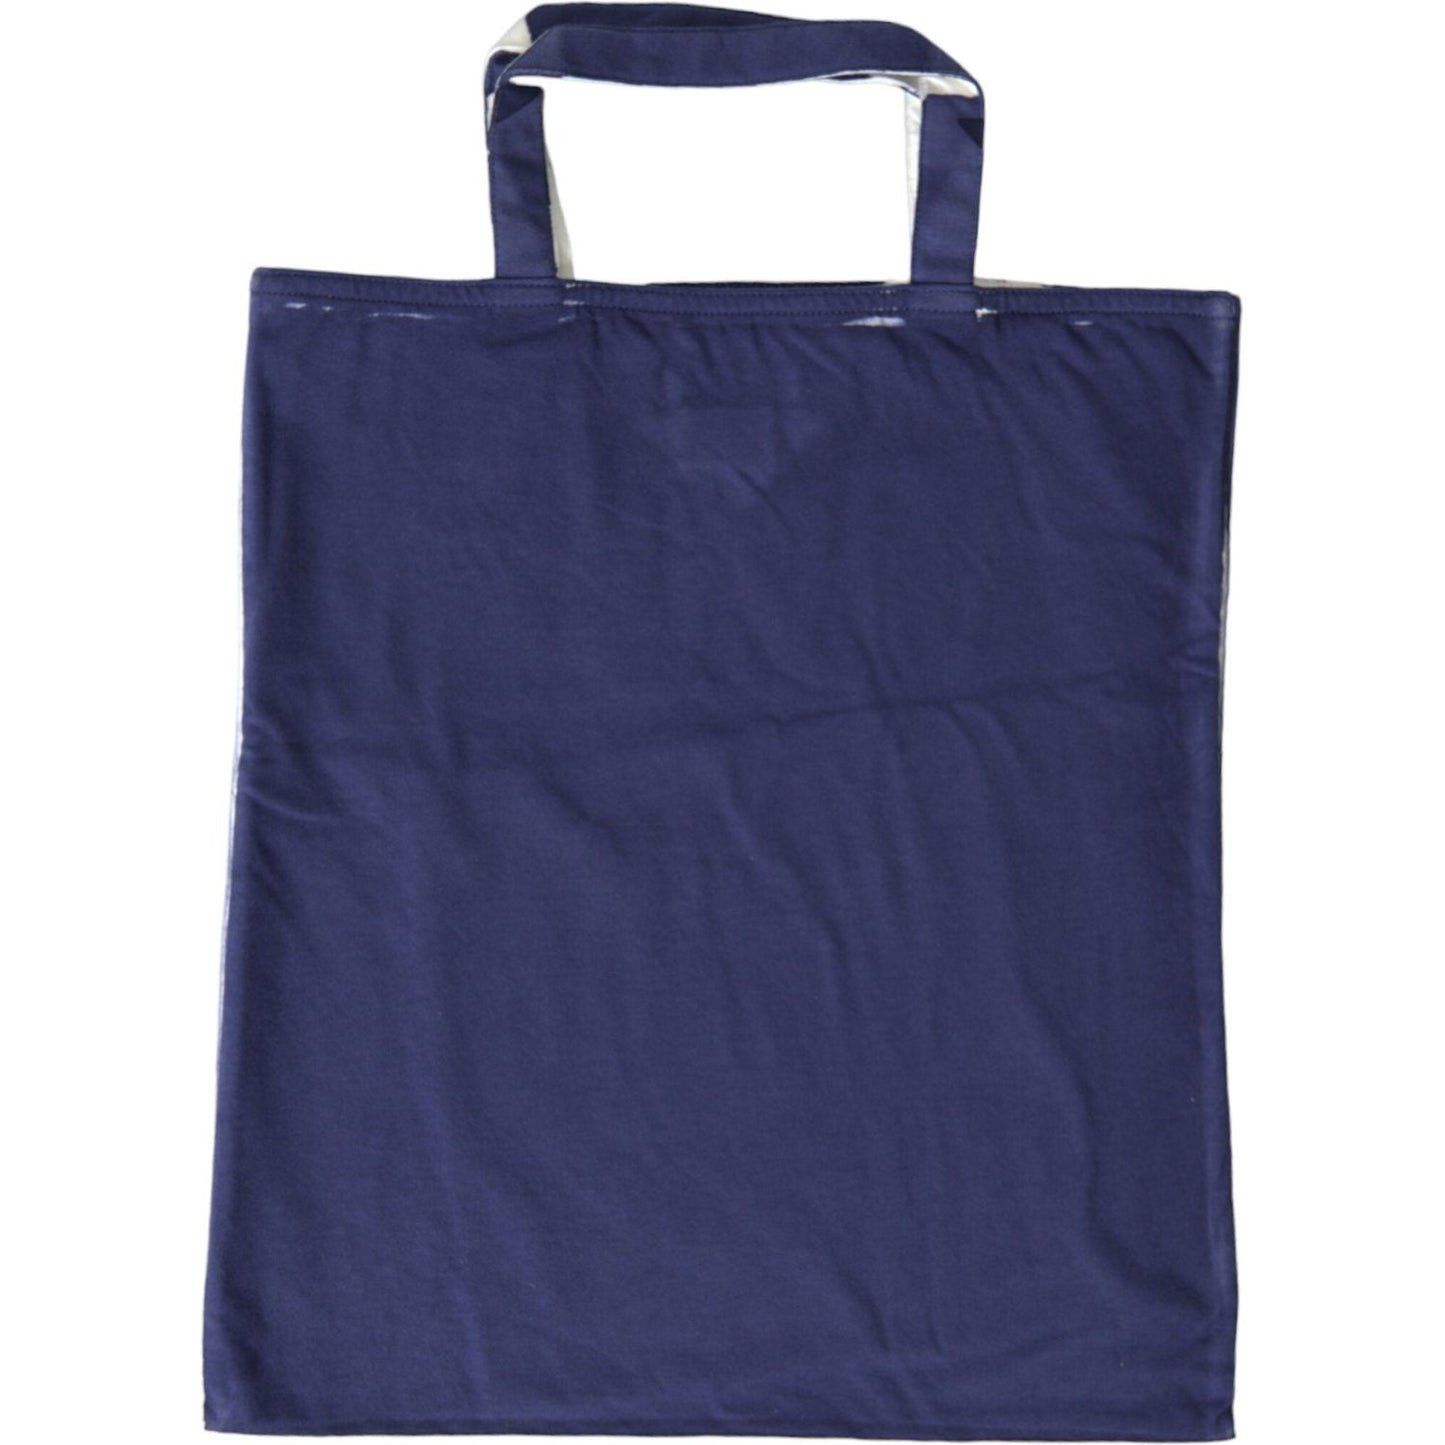 Elegant Blue Tote Bag for Chic Outings